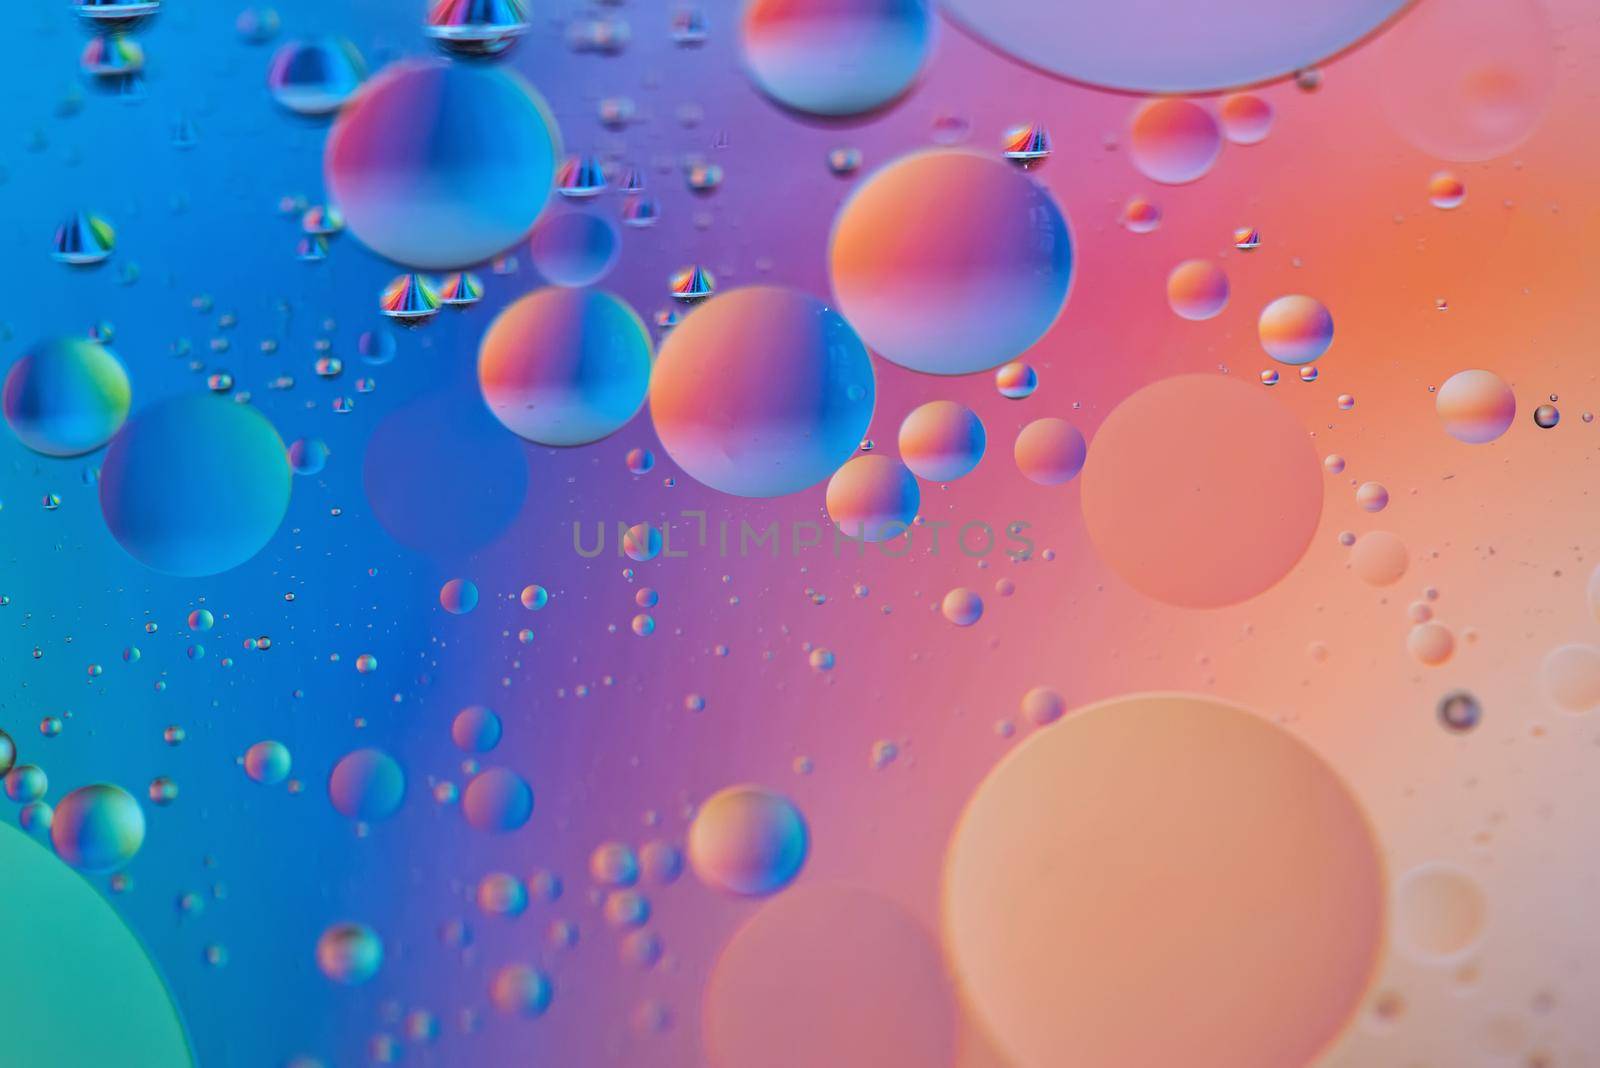 Oil drops in water. Defocused abstract psychedelic pattern image orange and blue colored. Abstract background with colorful gradient colors. DOF.